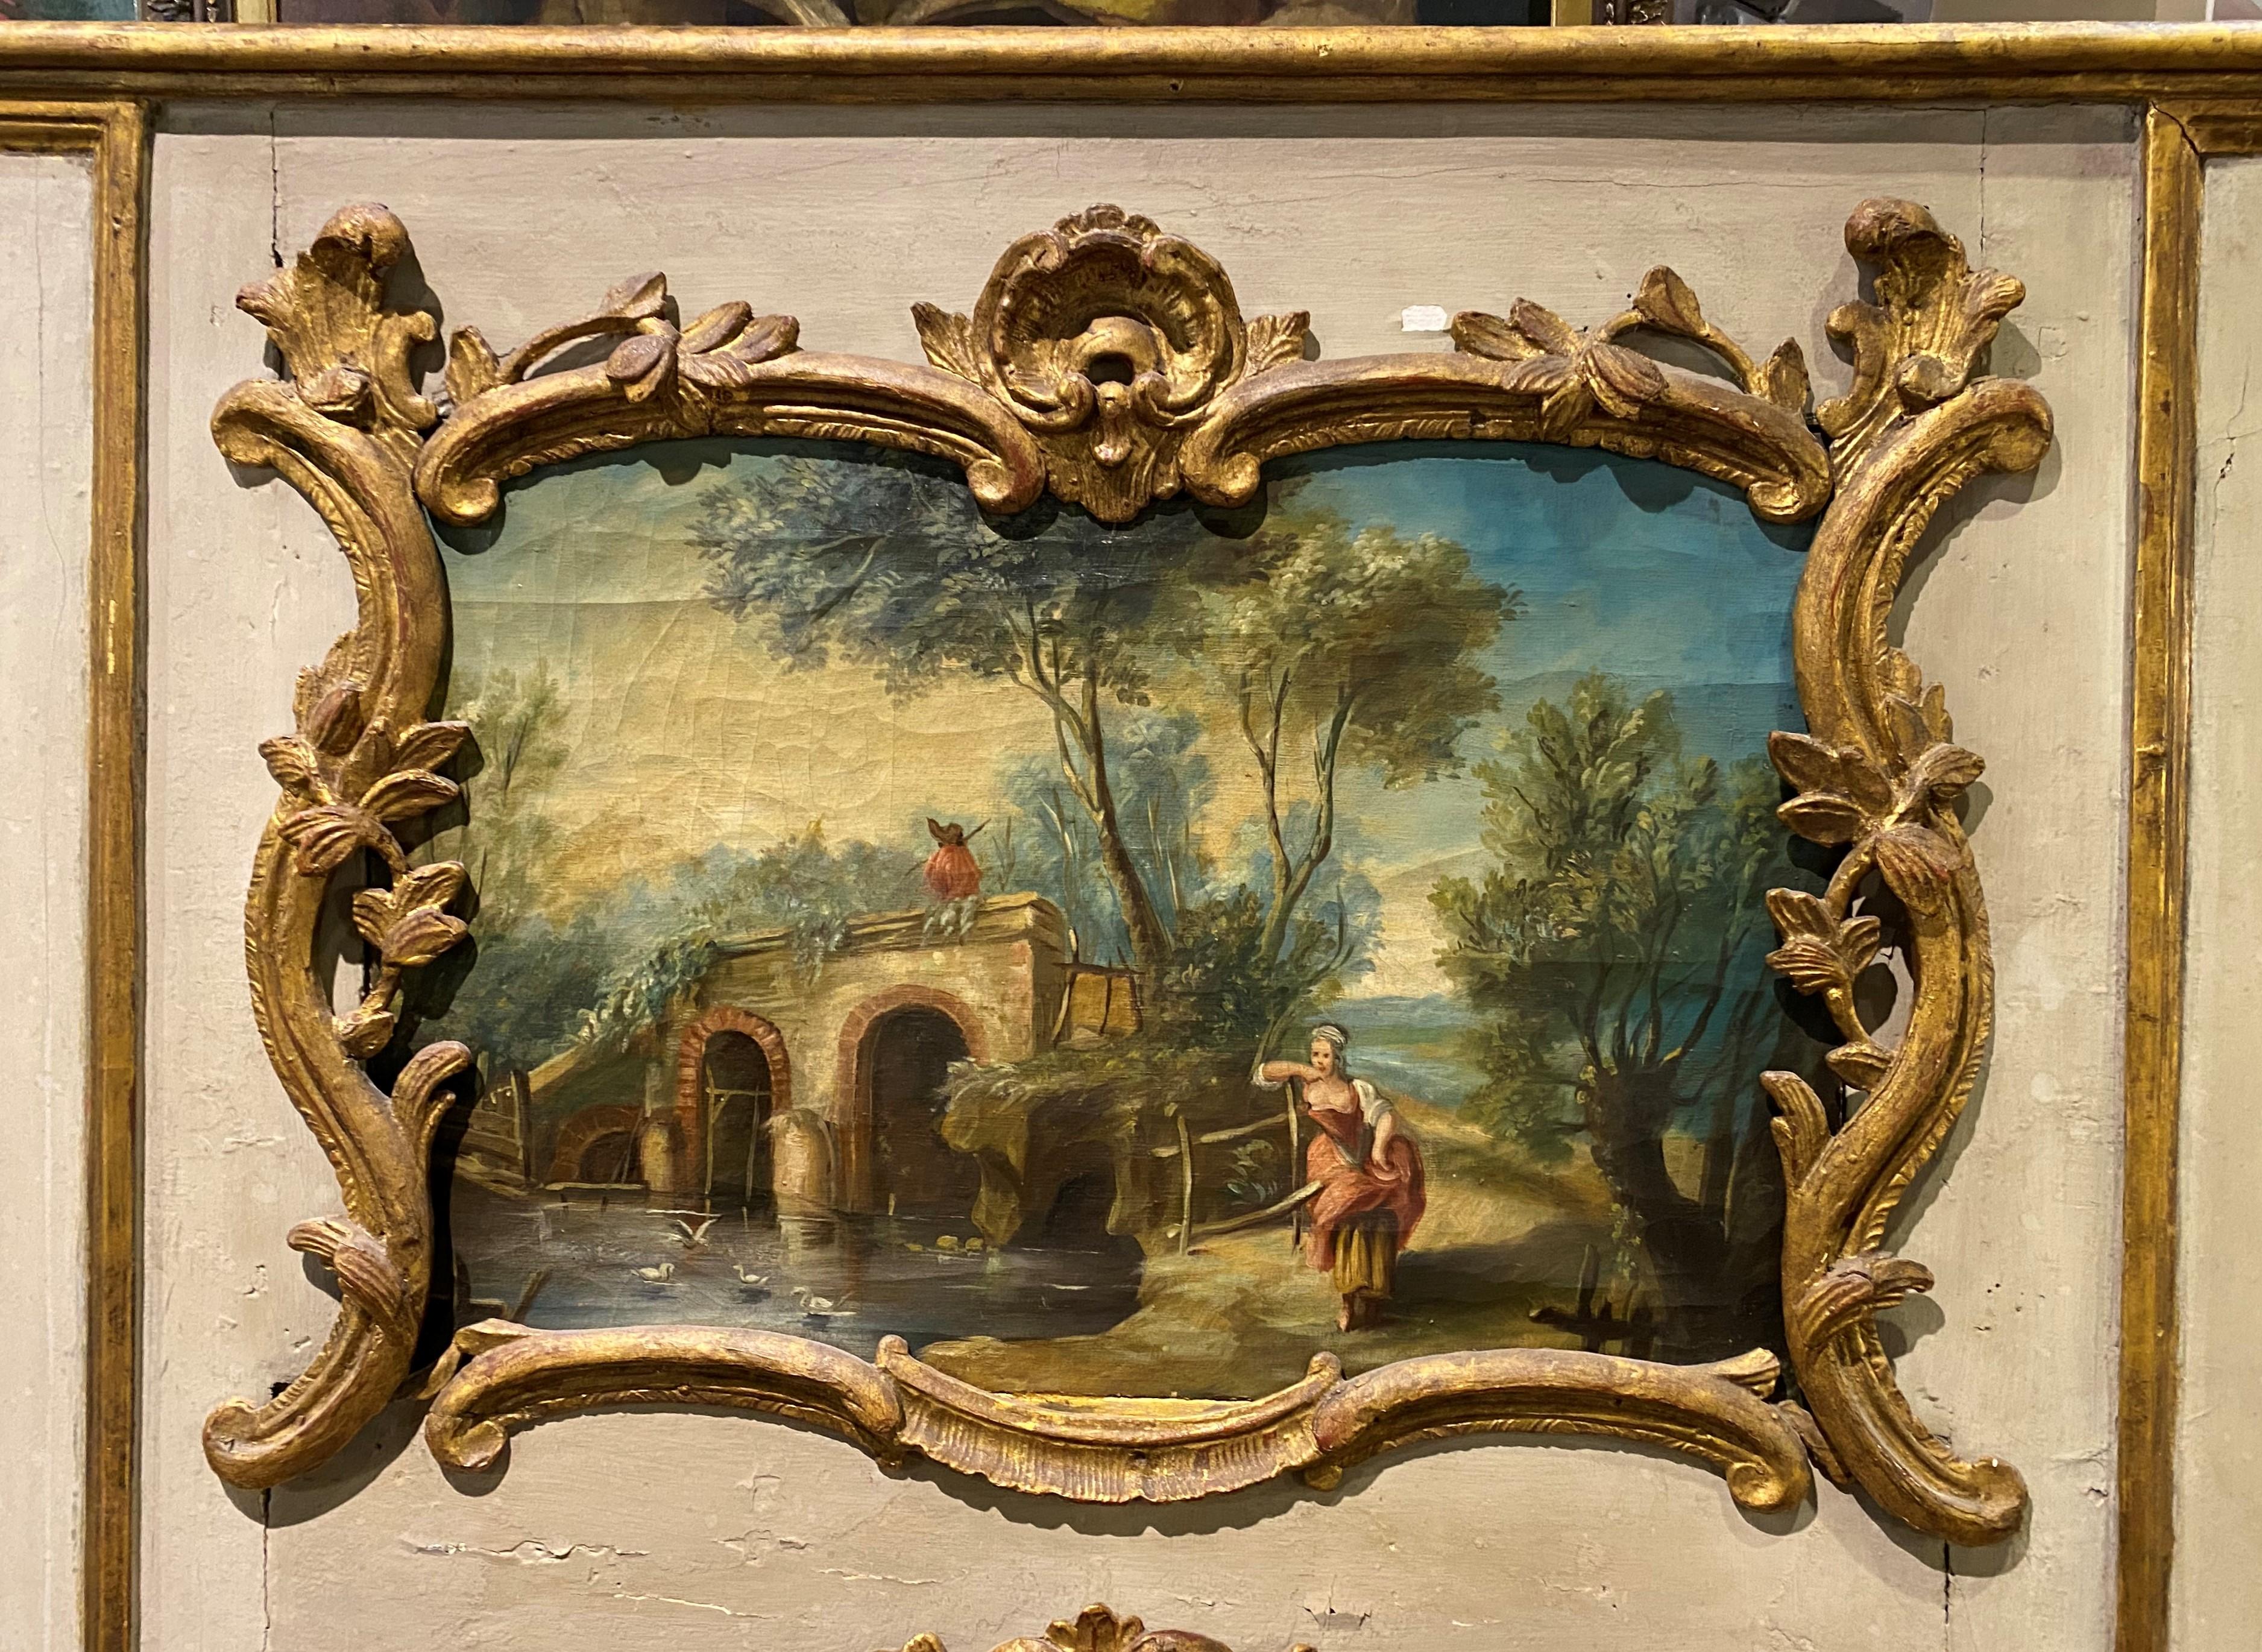 A fine large Trumeau over mantle mirror with a hand painted French genre scene with a woman and an arched bridge, with an applied gilt scrollwork surround, over a vertical mirror with carved gilt surround. The mirror is French in origin, dating to